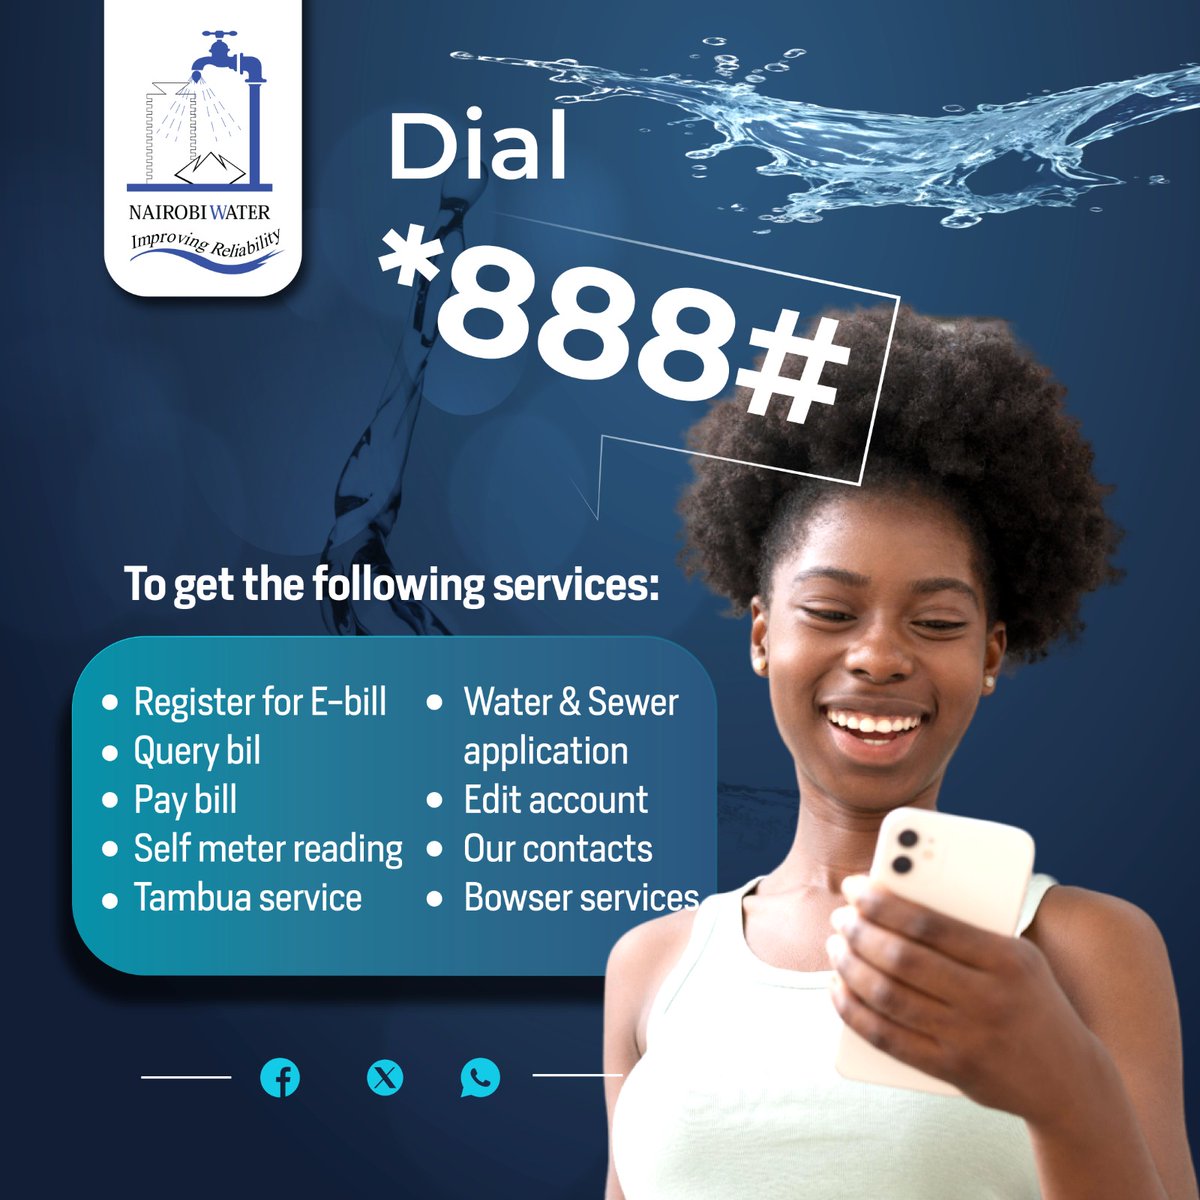 Access our services with ease simply dial *888#